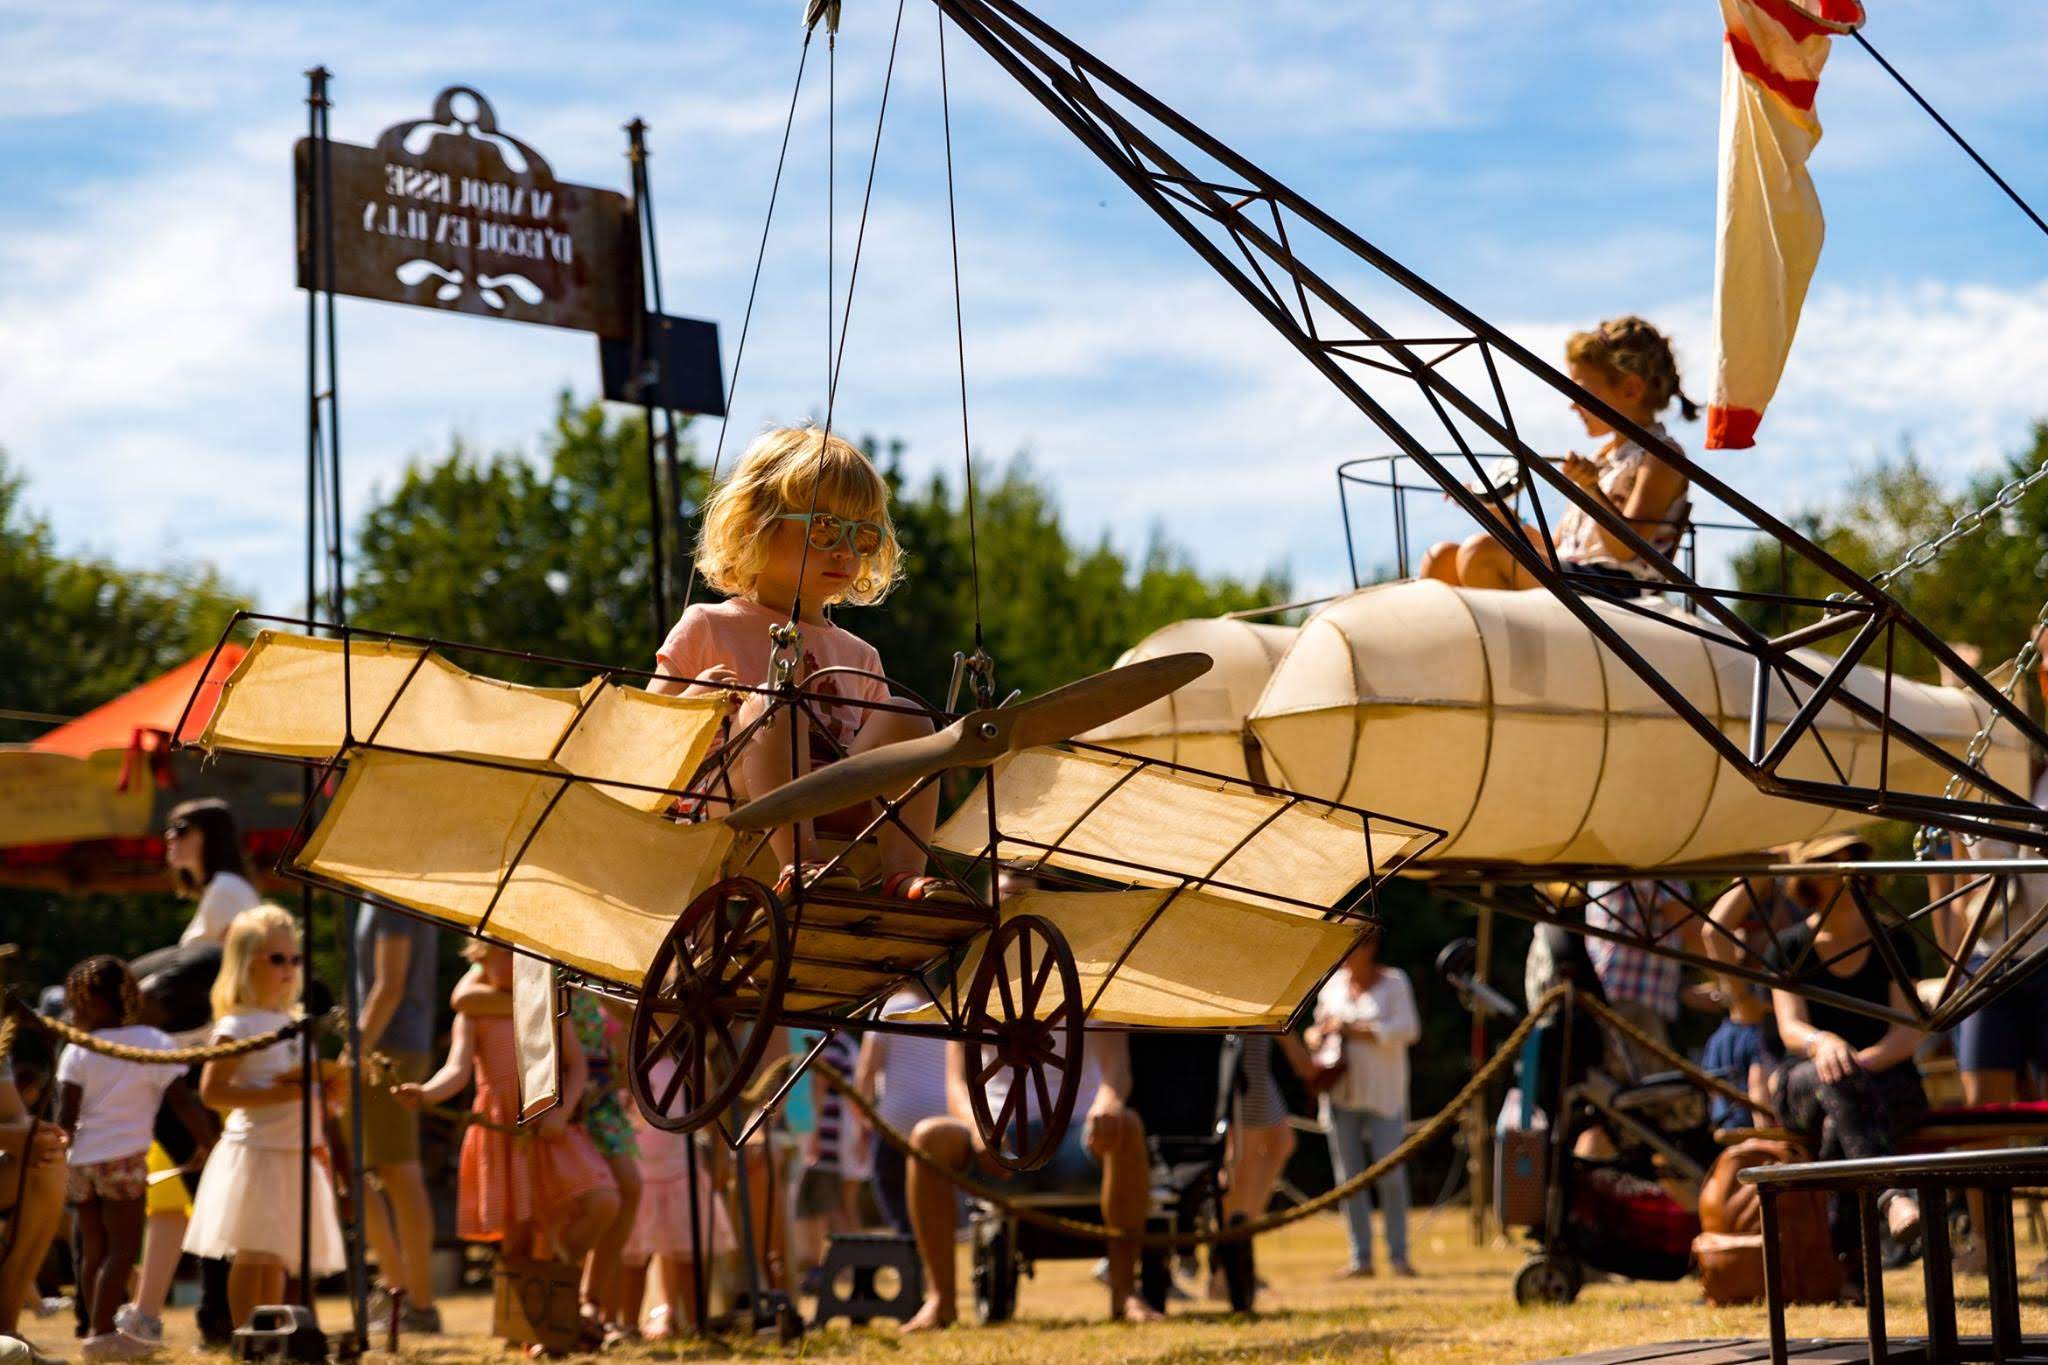 Children sit in a swing crafted to look like a plane at a festival outdoors